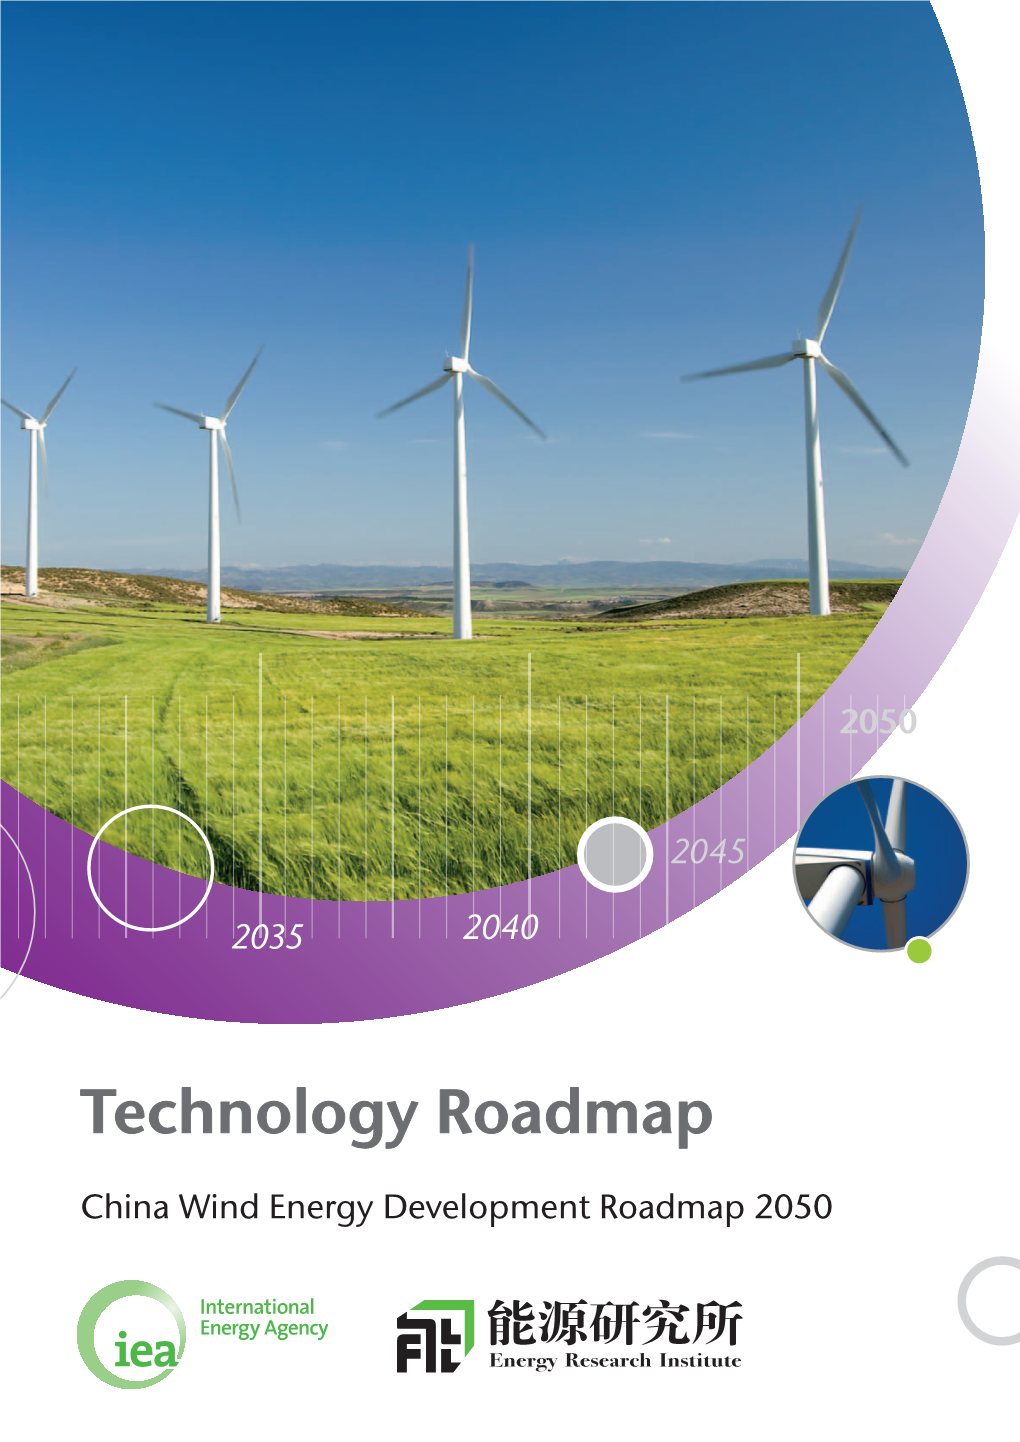 China Wind Energy Development Roadmap 2050 Table of Contents